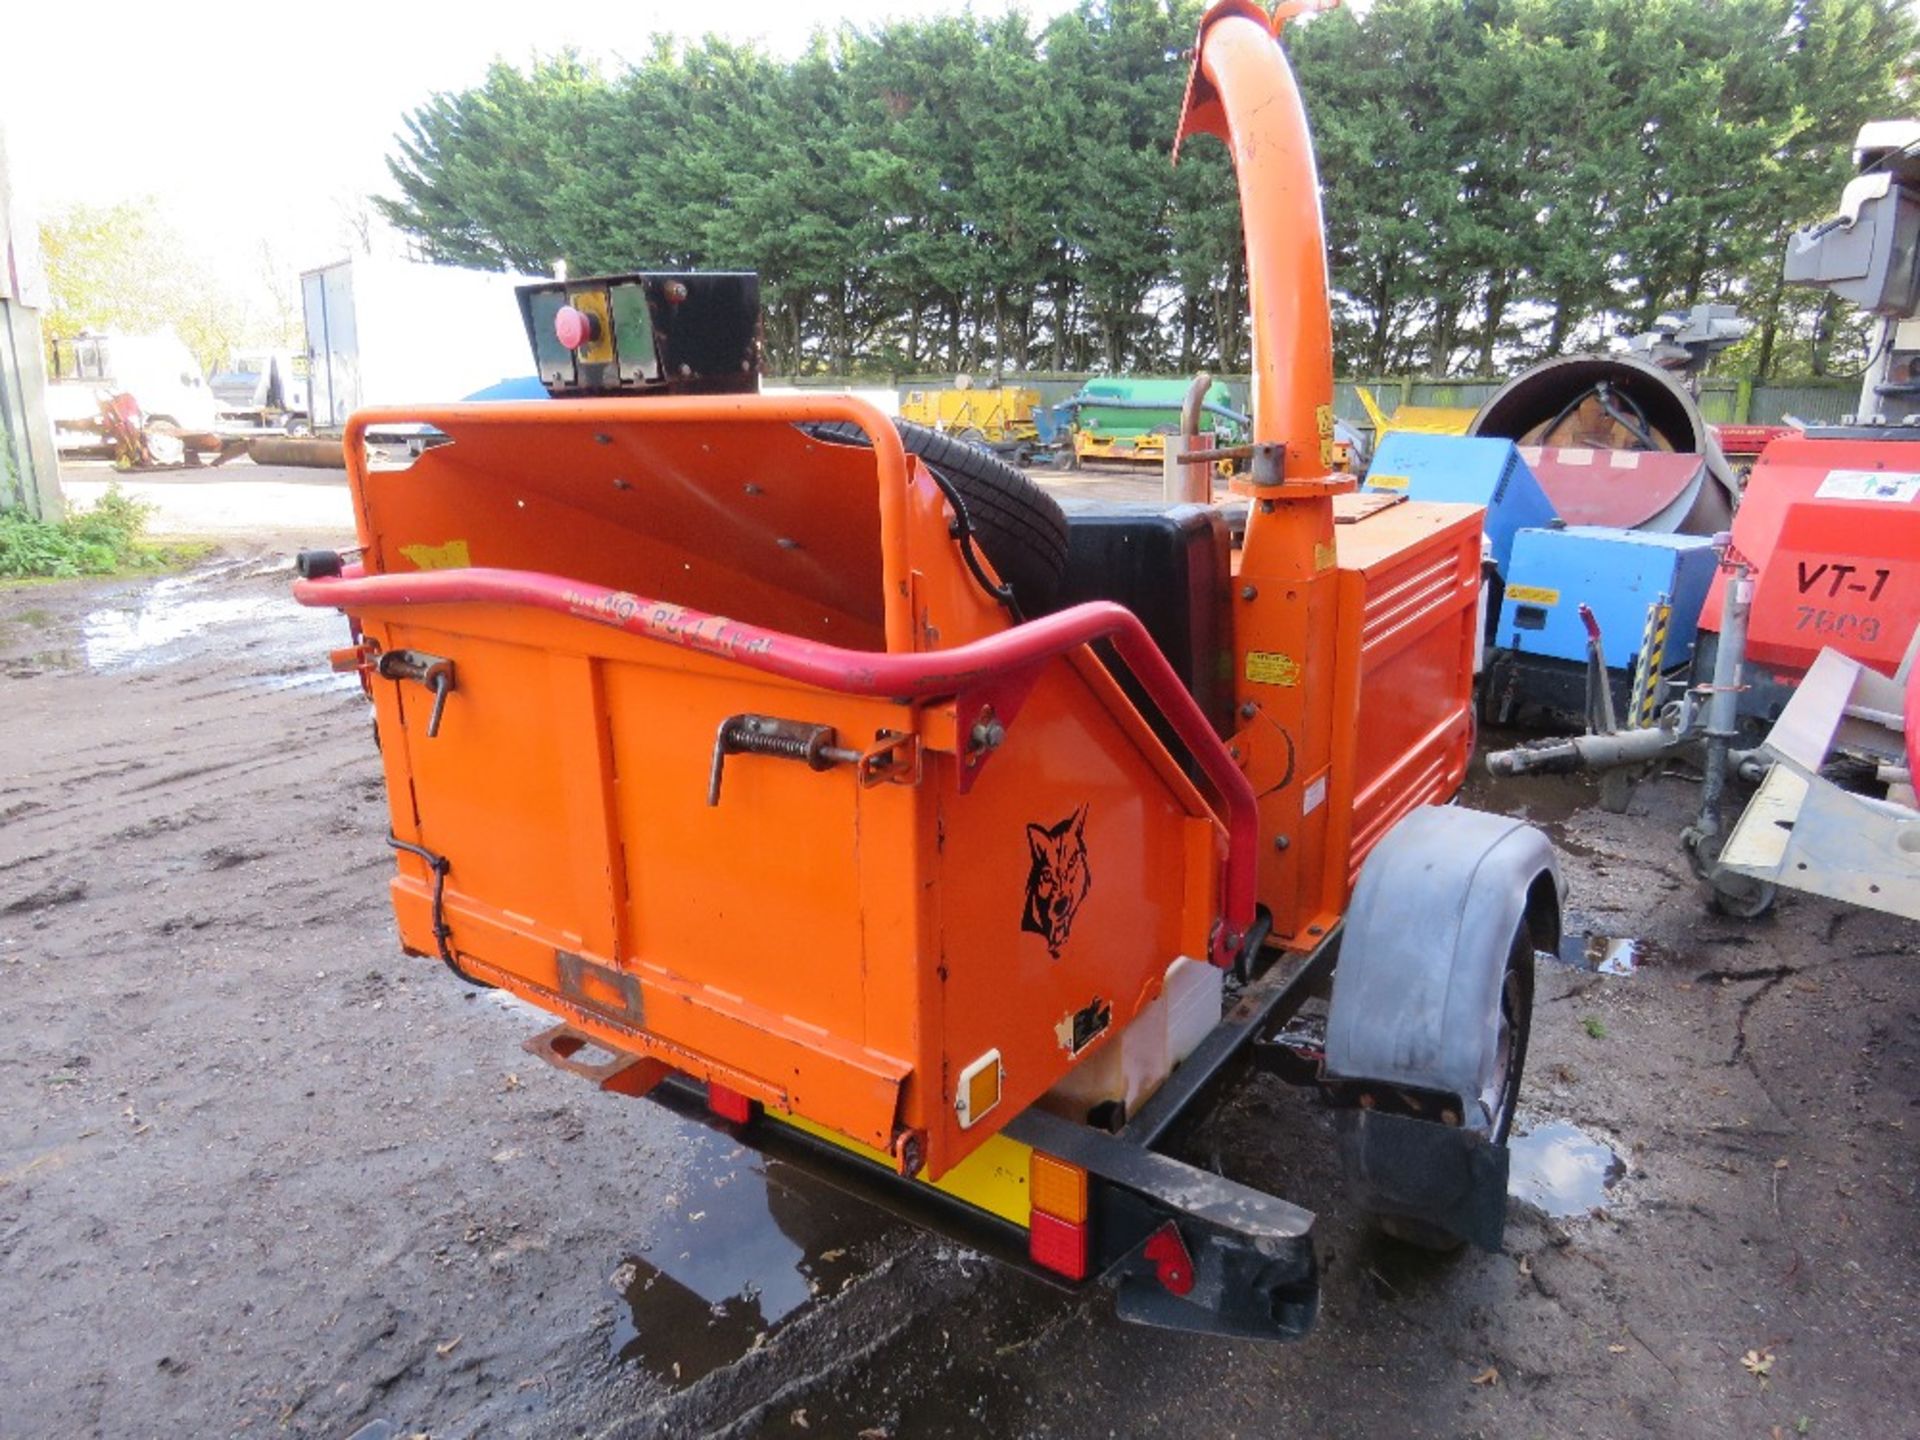 TIMBERWOLF TOWED CHIPPER UNIT WITH KUBOTA DIESEL ENGINE. 990 RECORDED HOURS APPROX. WITH KEY. WHEN T - Image 7 of 12